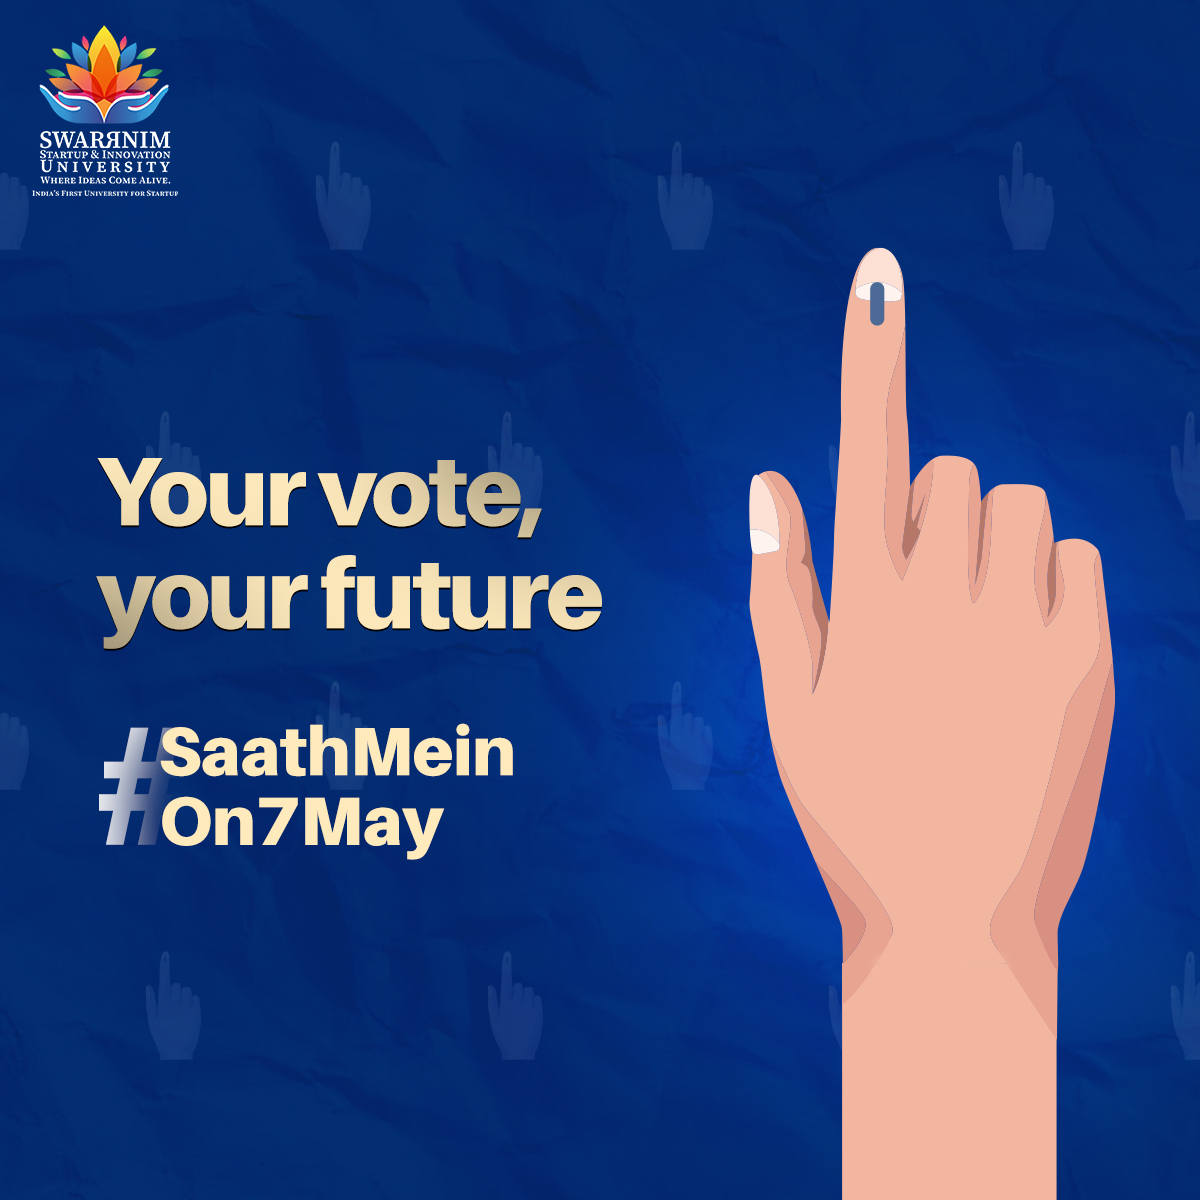 Make sure your first vote is the right vote. Swipe to get some essential tips for first time voters. You'll need it soon to vote #SaathMeinOn7May!

#VoteForYourFuture #SwarrnimVotes #YouthPower2024 #ChooseYourIndia #YourVoteYourVoice #DecideYourDestiny #IndiaVotes2024